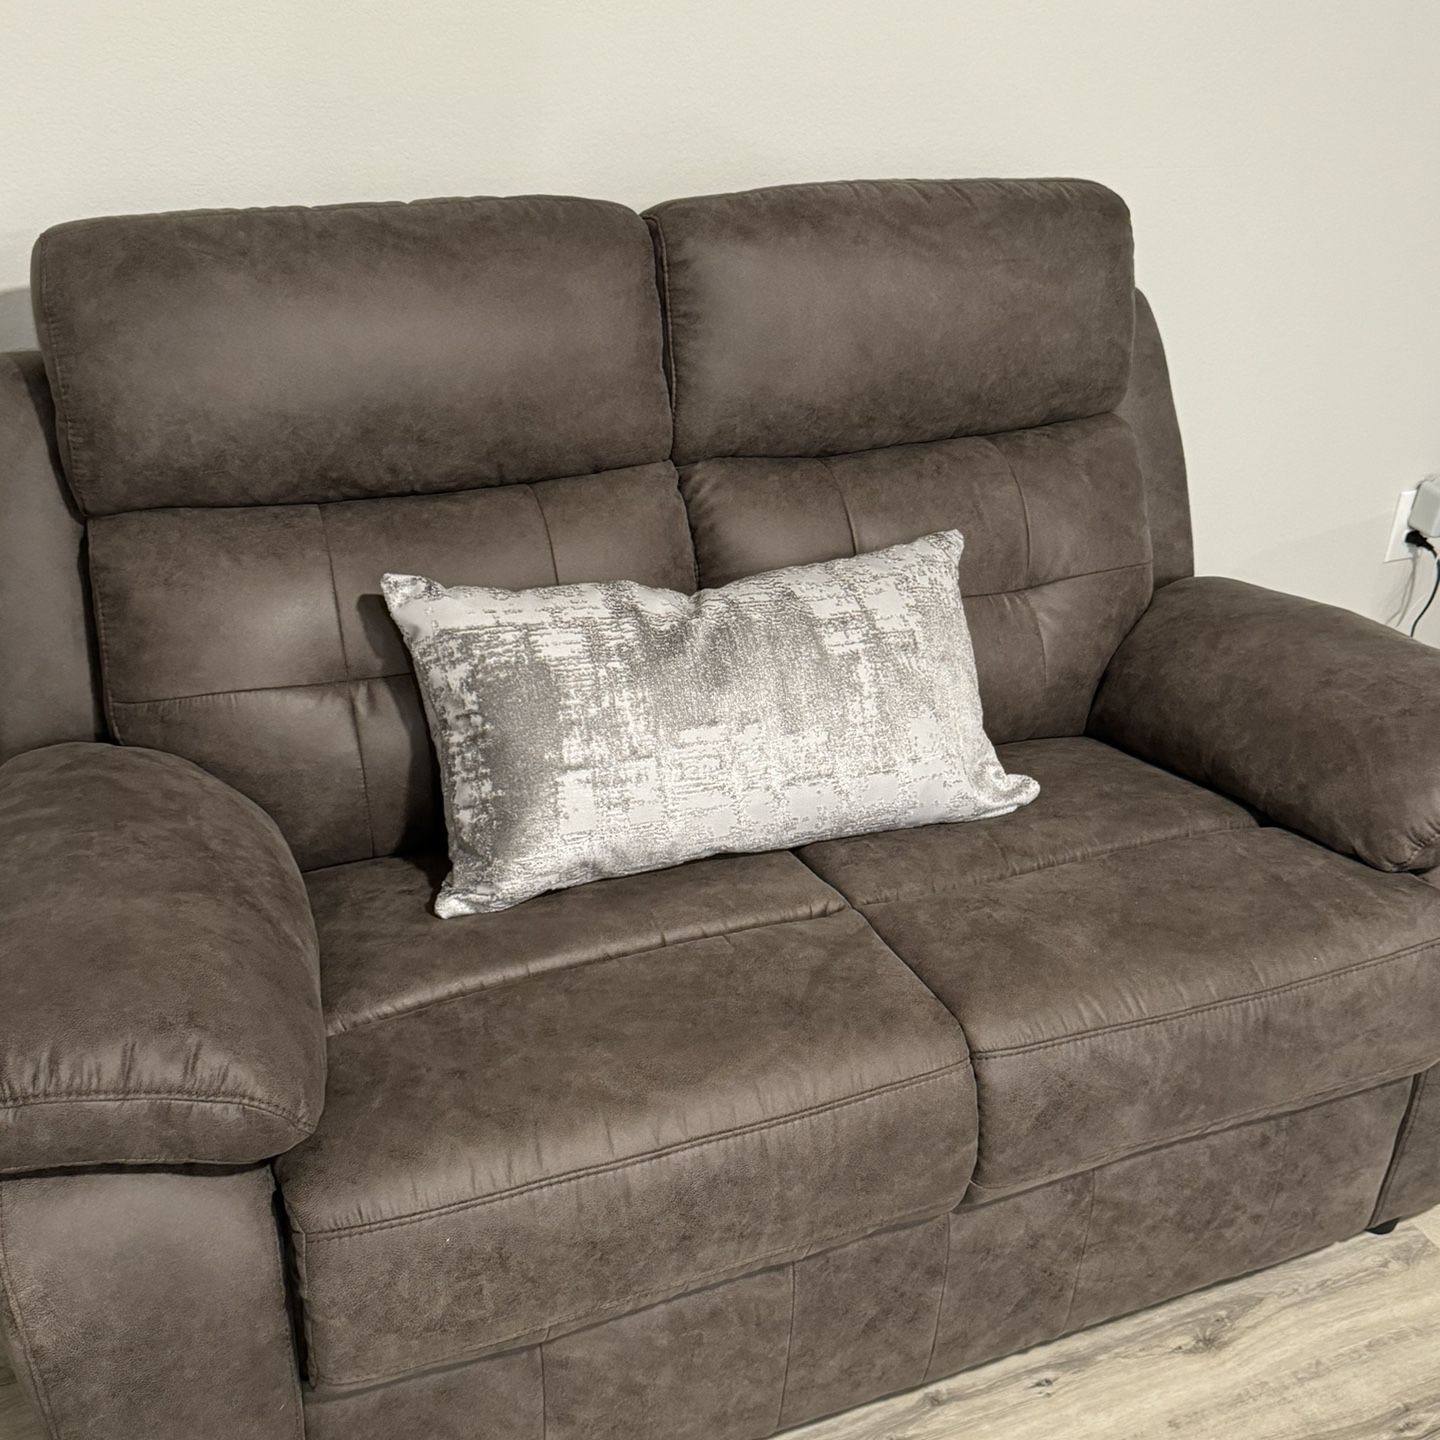 BRAND NEW RECLINER COUCH SET! 